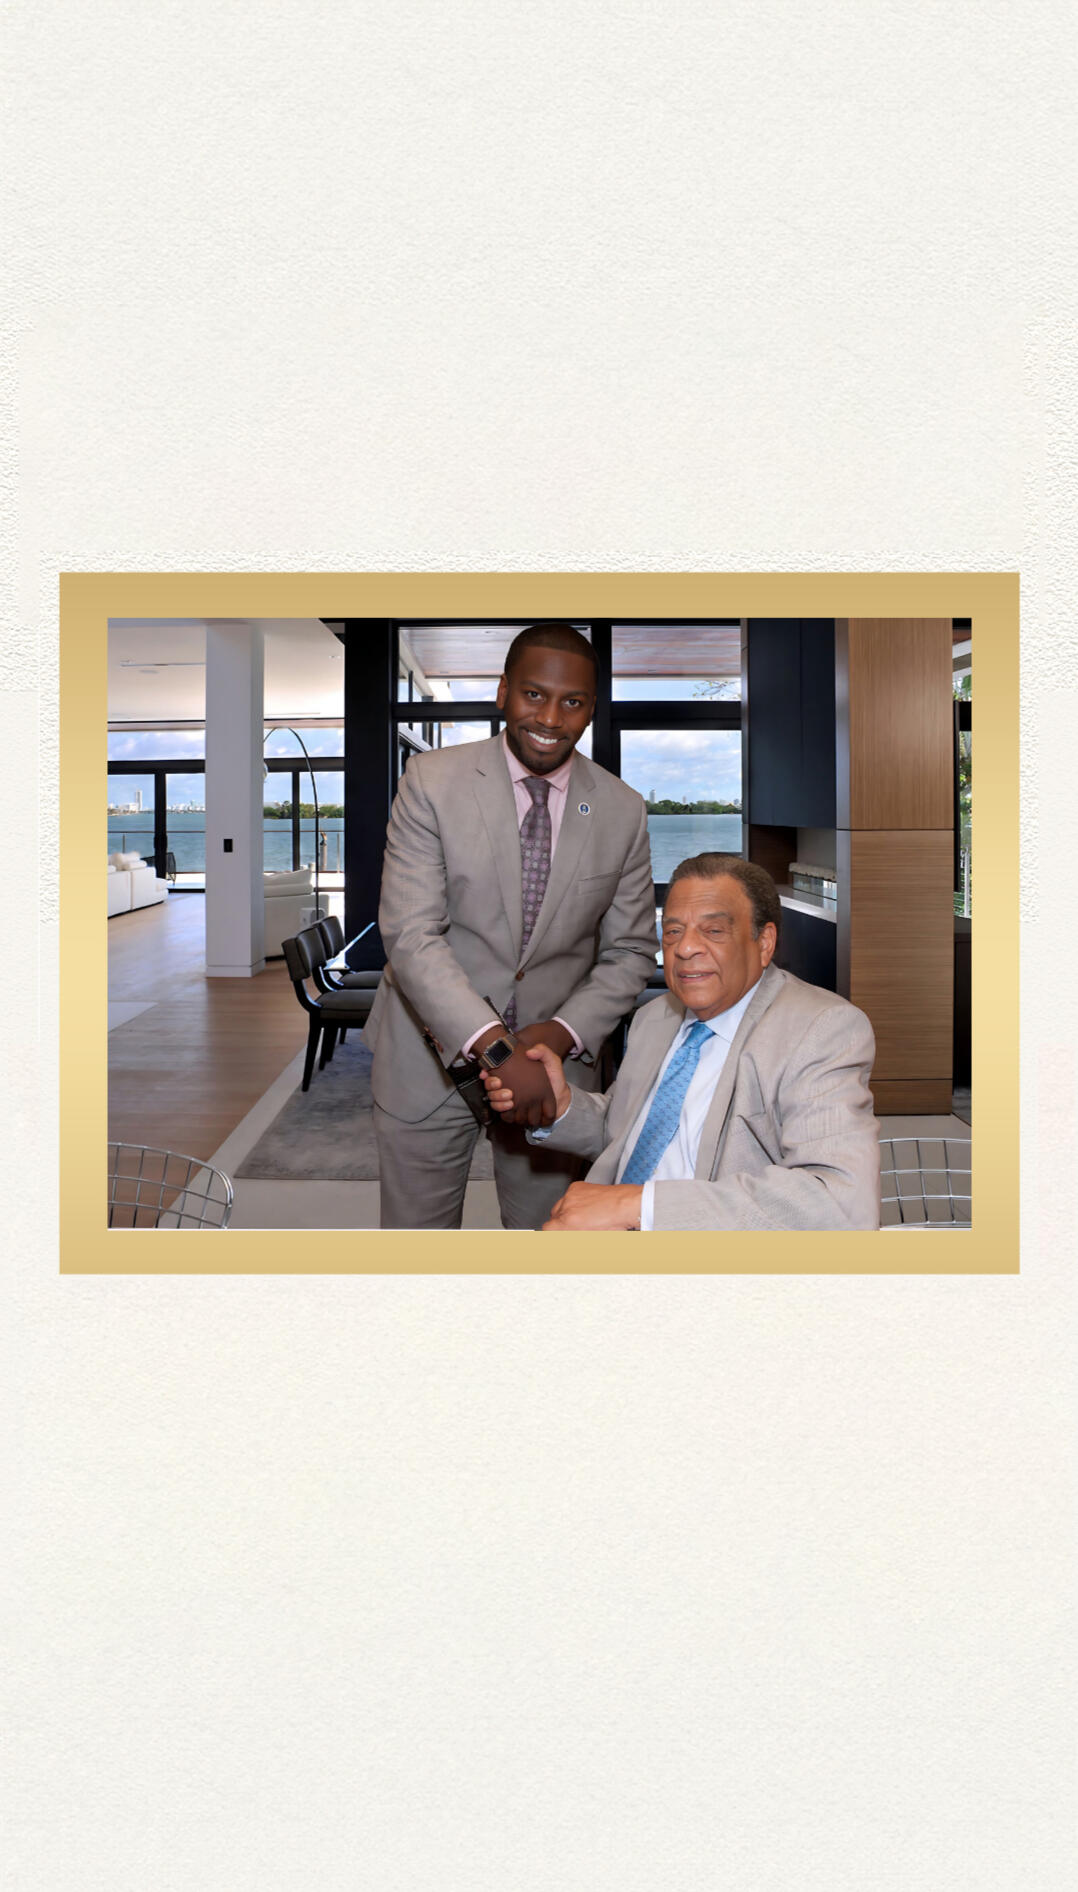 Micah Berkley shaking hands with Andrew Young Jr. in a Miami office overlooking the water.